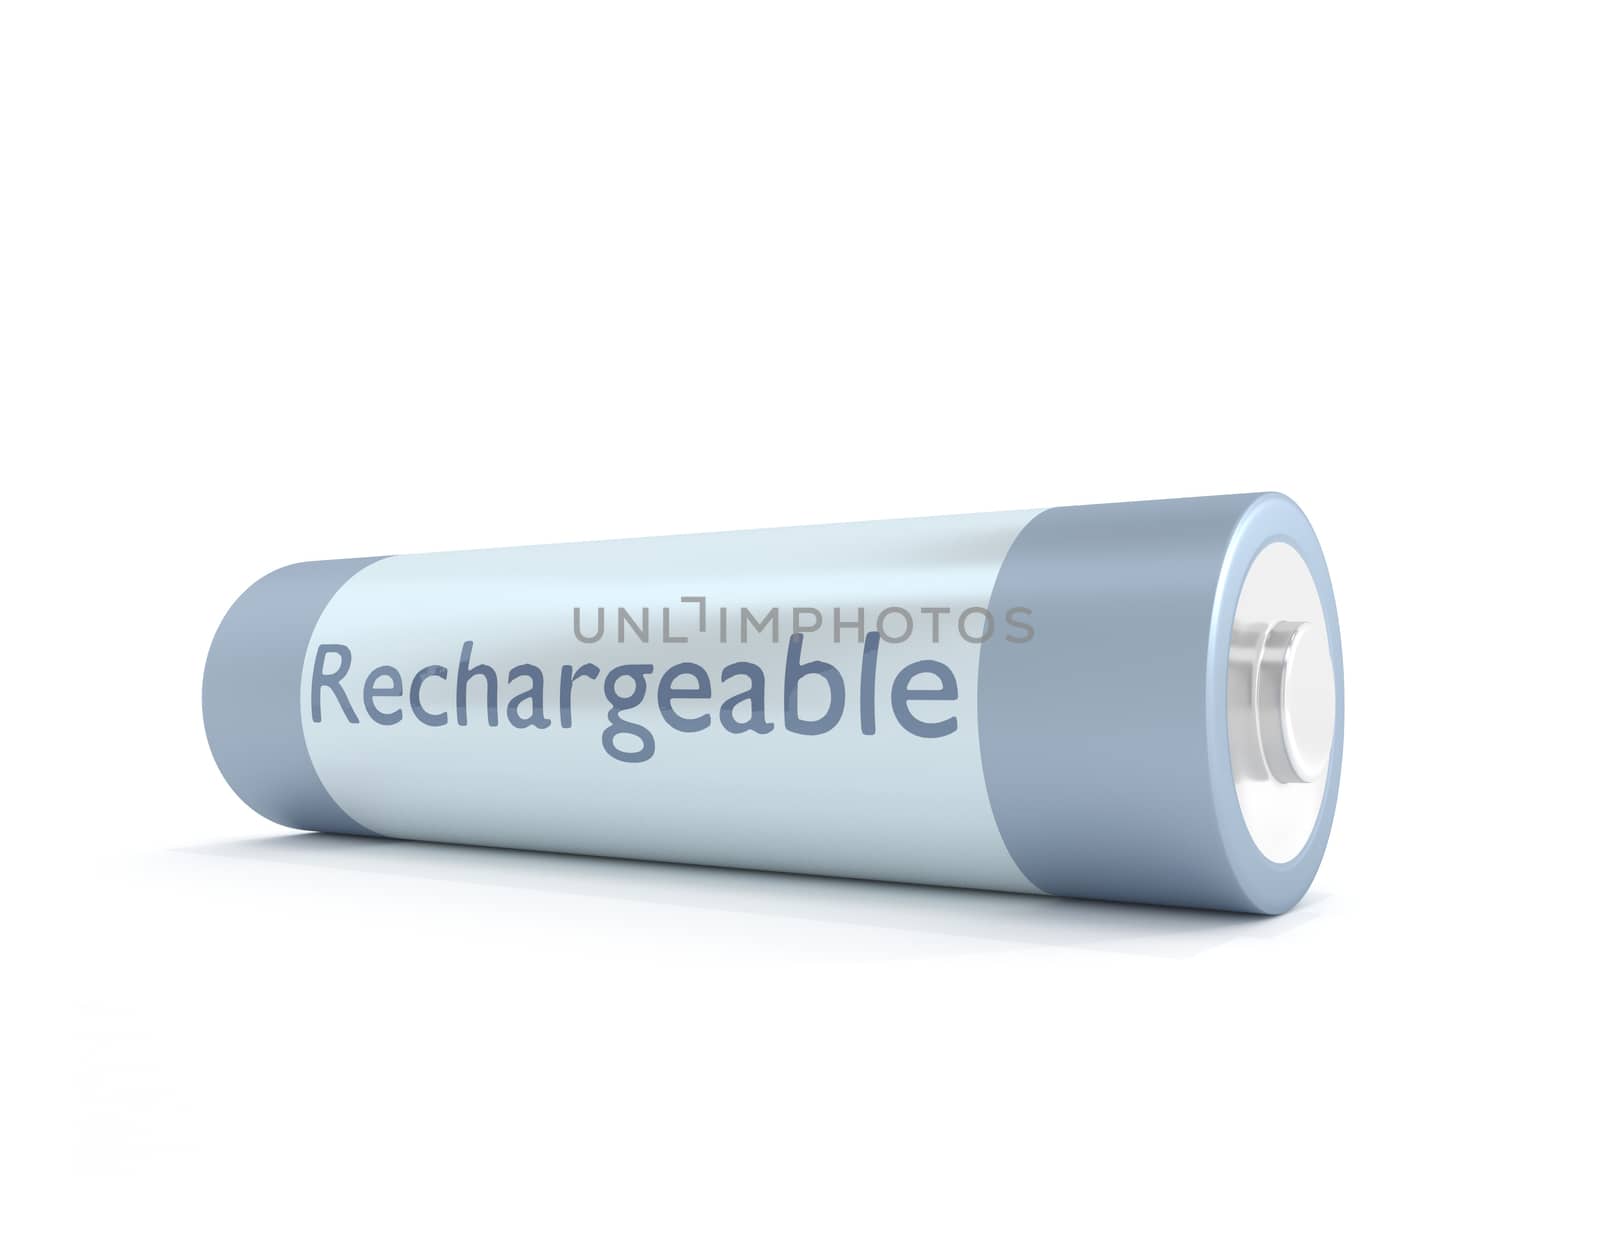 Illustration depicting a single rechargeable battery over white.